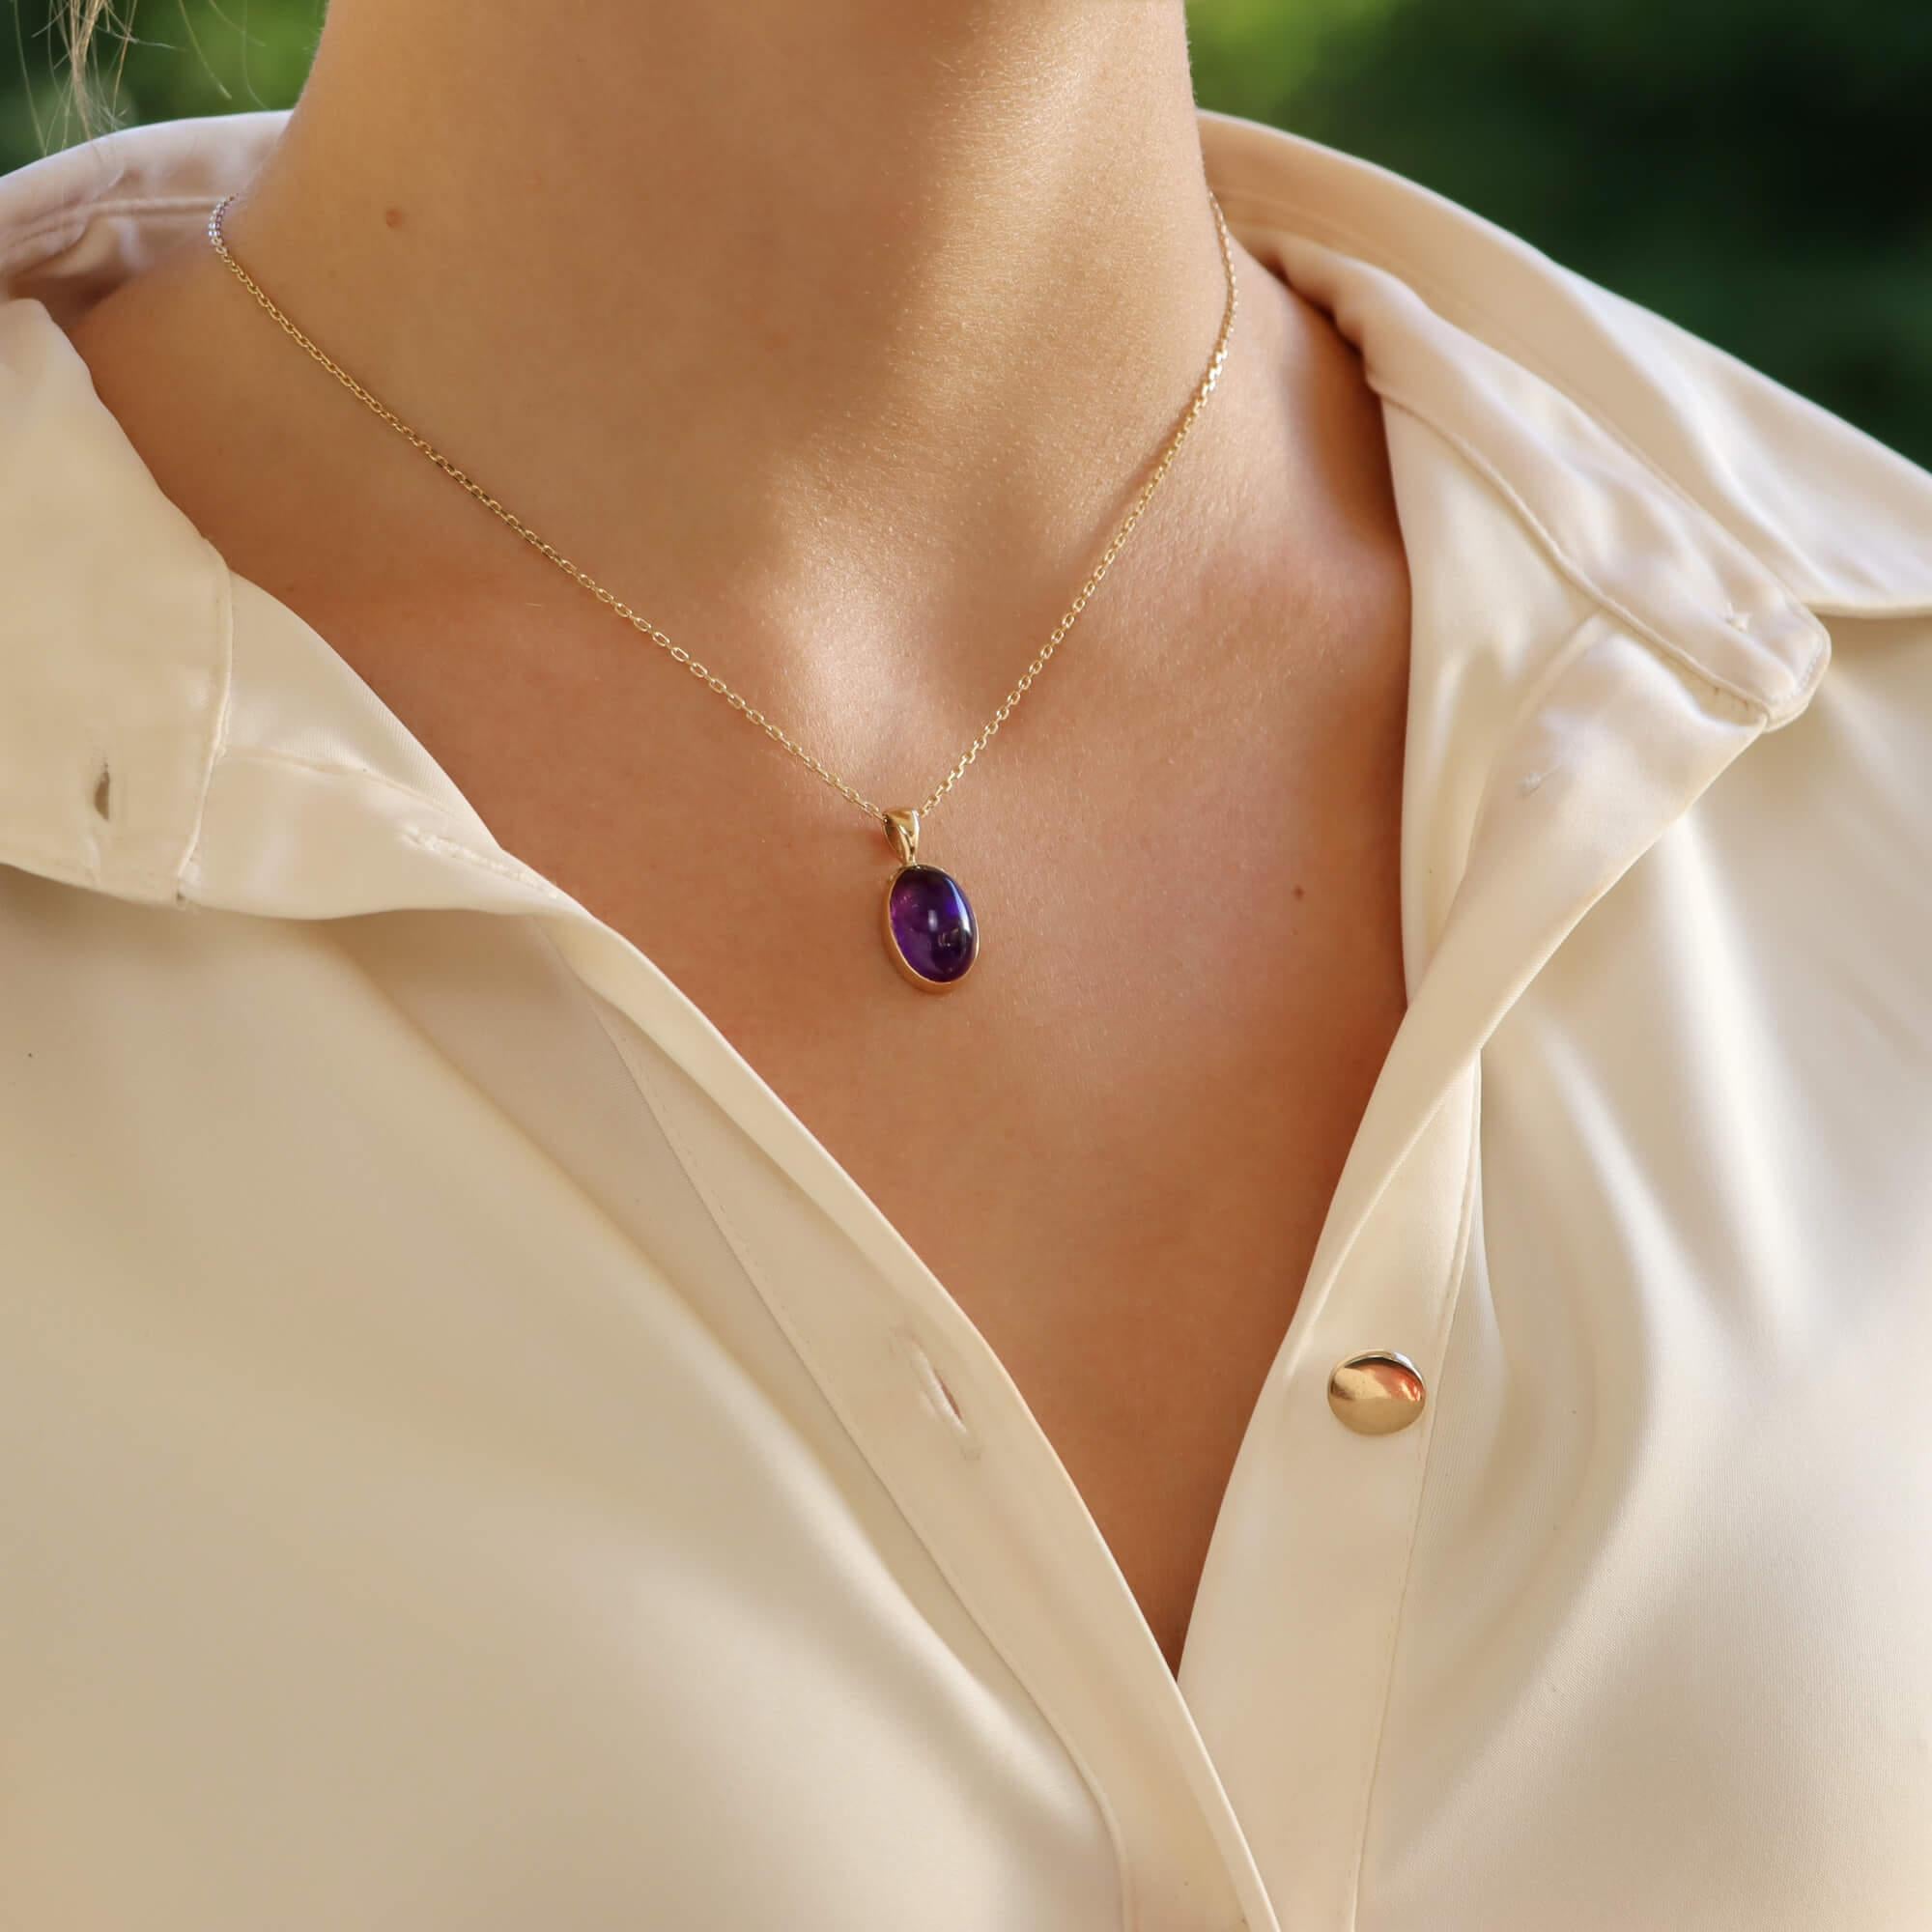 A beautiful amethyst pendant set in 9k yellow gold.

The pendant solely features a lovely vibrant purple amethyst stone, simply rub over set in a 9k yellow gold mount. The pendant hangs from a matching 9k yellow gold trace chain. The chain measures